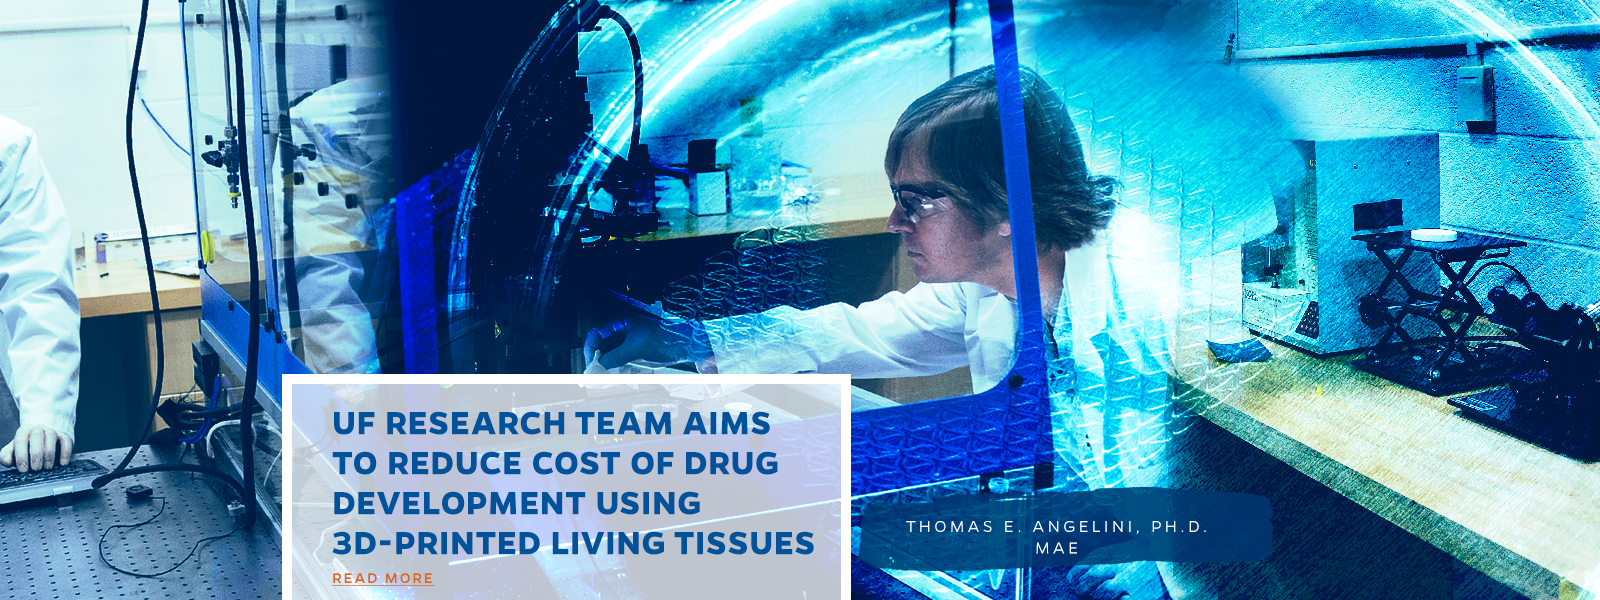 UF Research Team Aims to Reduce Cost of Drug Development Using 3D-Printed Living Tissues